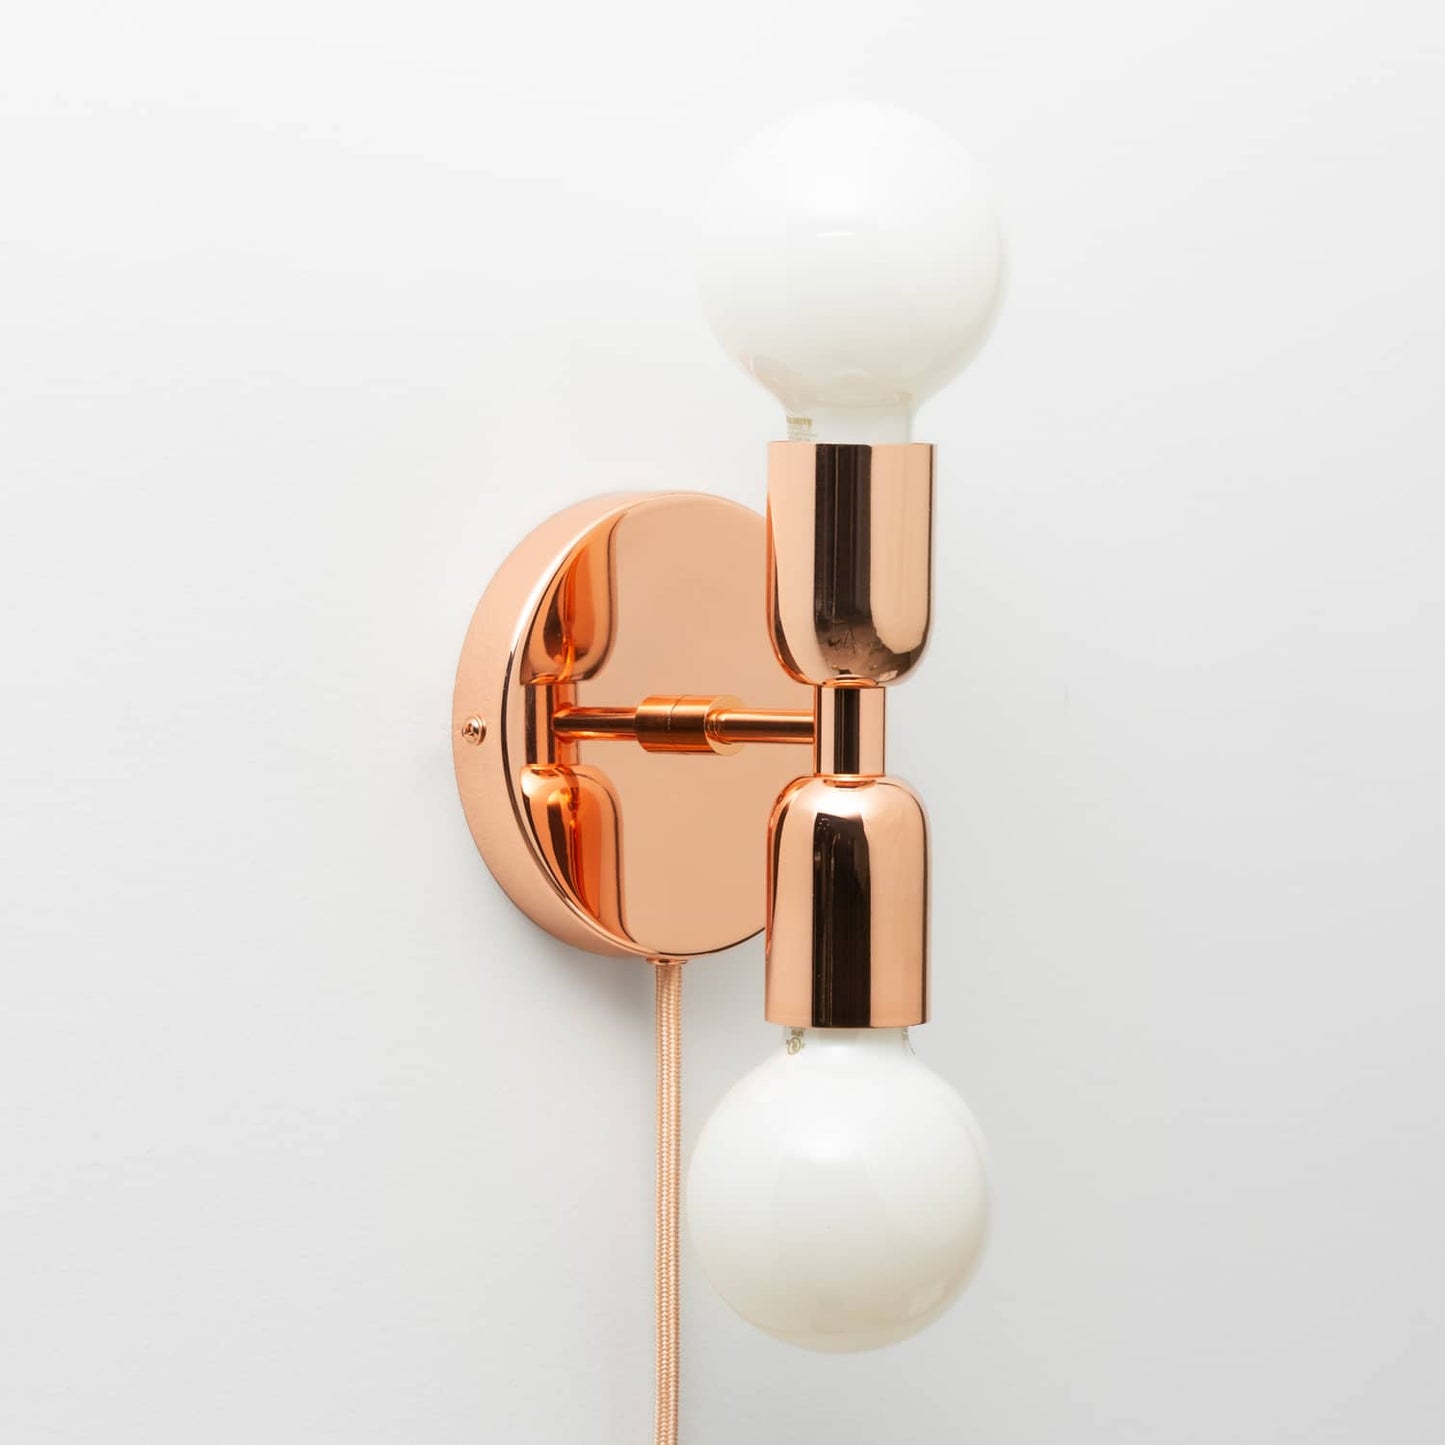 Junction Mini Duo Plug-In Sconce in Polished Copper finish with G25 milk glass light bulbs